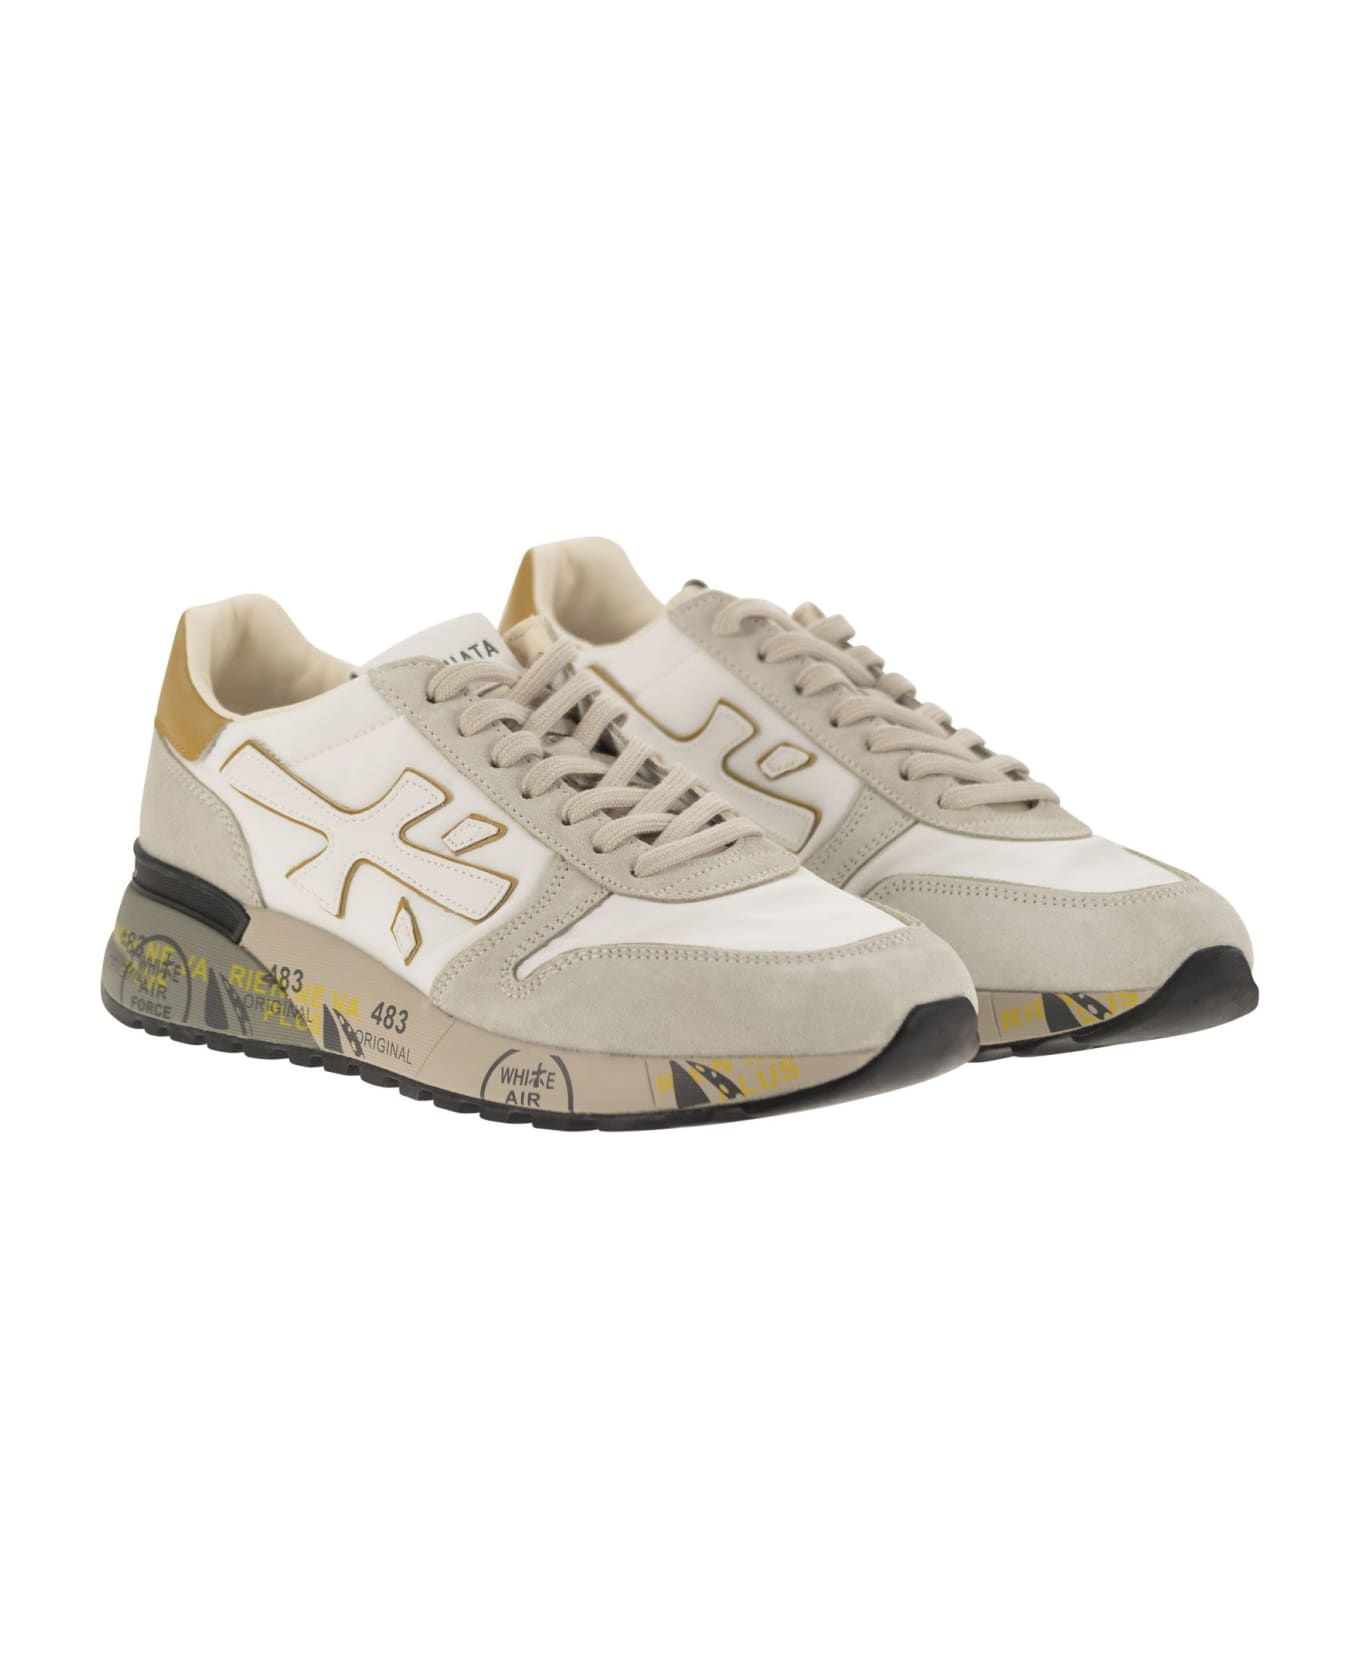 Premiata Mick Suede, Nylon And Leather Sneakers - White/grey スニーカー